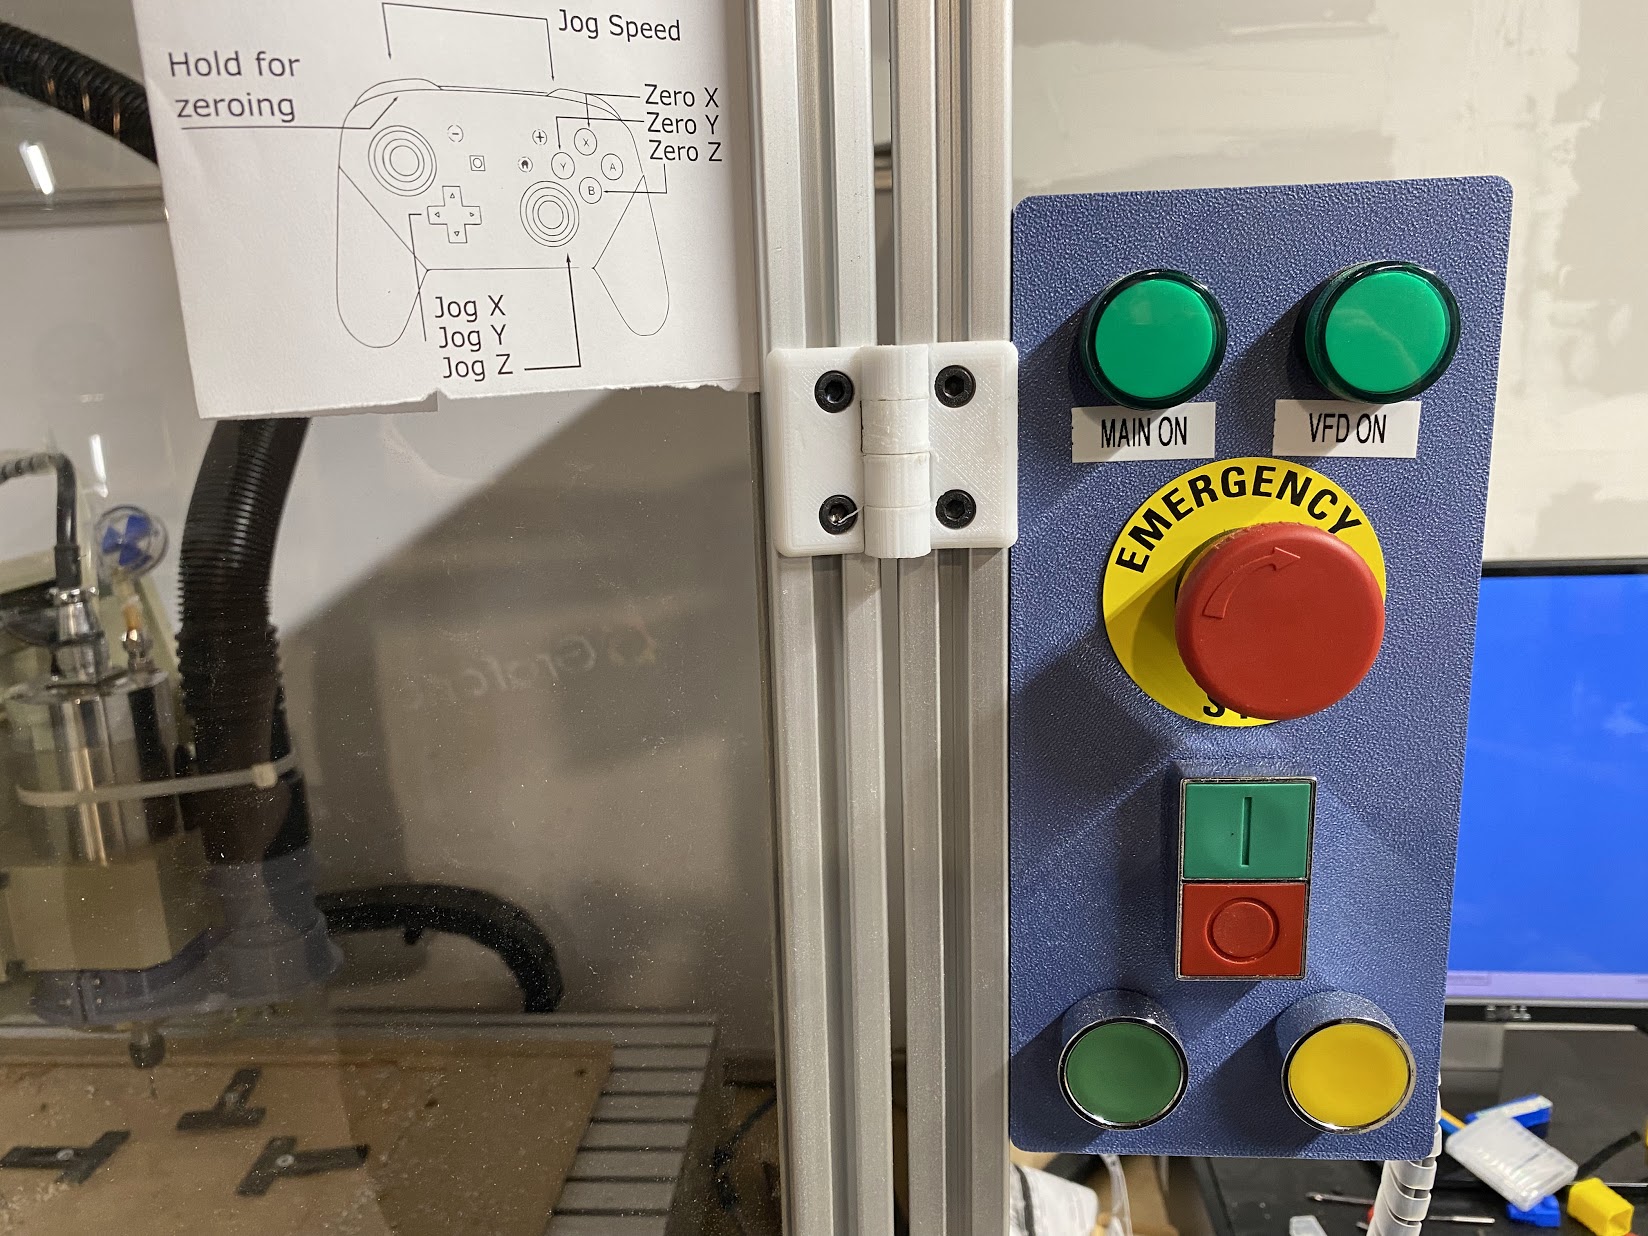 Enclosure panel with control buttons and emergency stop